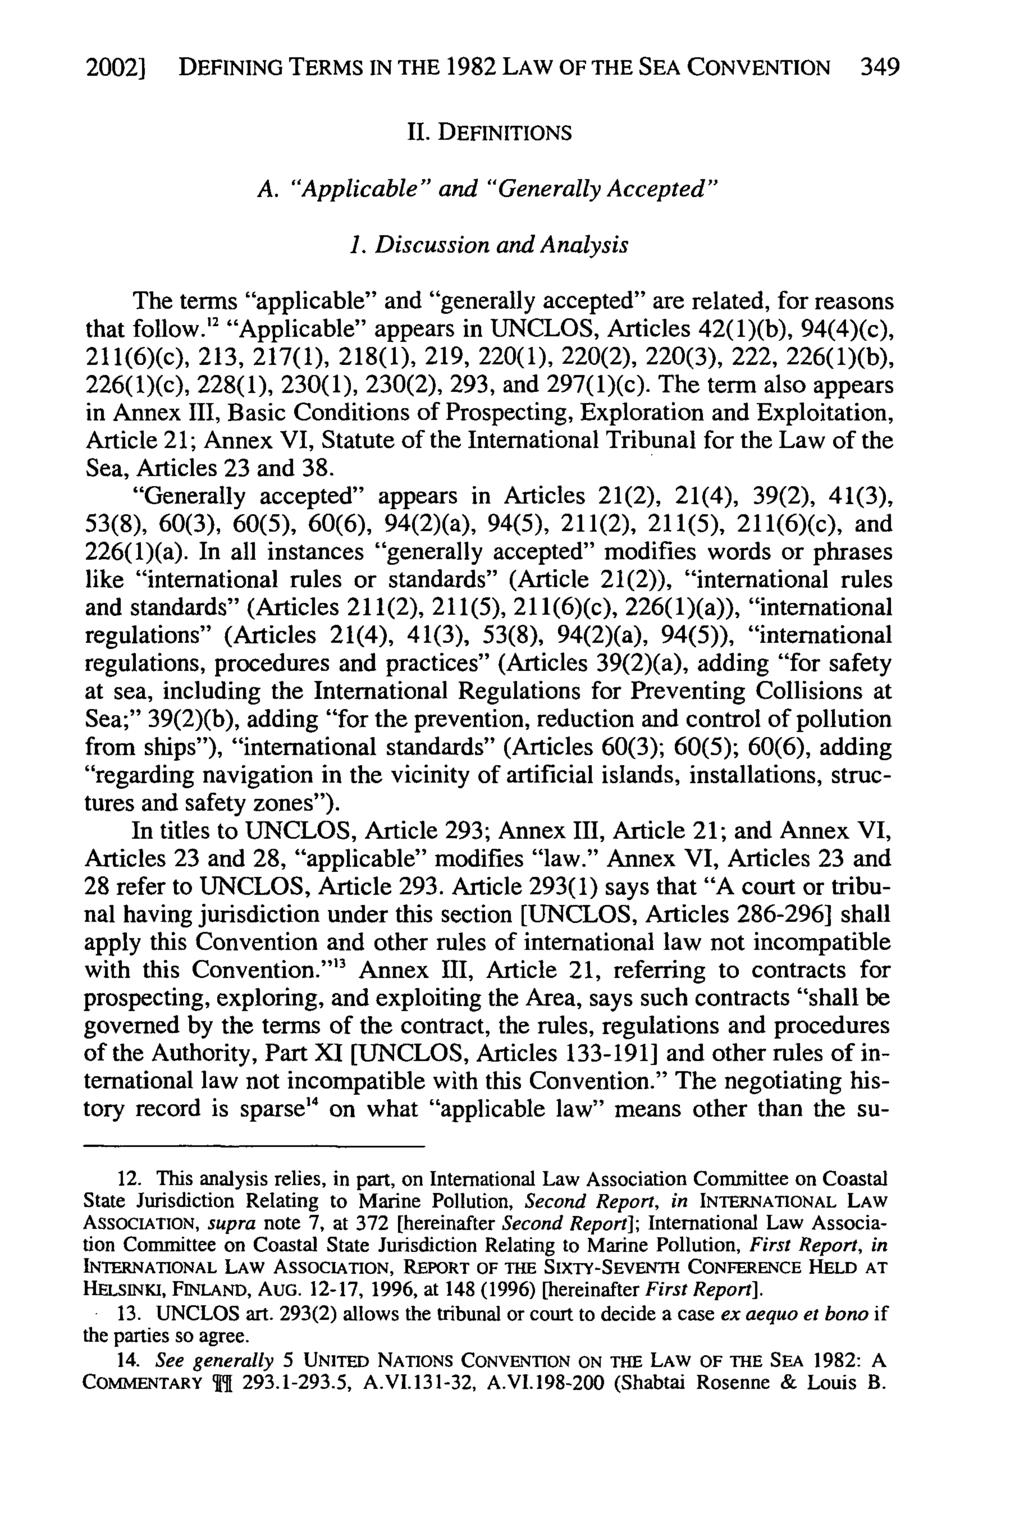 2002] Walker and Noyes: Definitions DEFINING TERMS IN THE 1982 for the 1982 Law of the Sea Convention LAW OF THE SEA CONVENTION 349 II. DEFINITIONS A. "Applicable" and "Generally Accepted" 1.